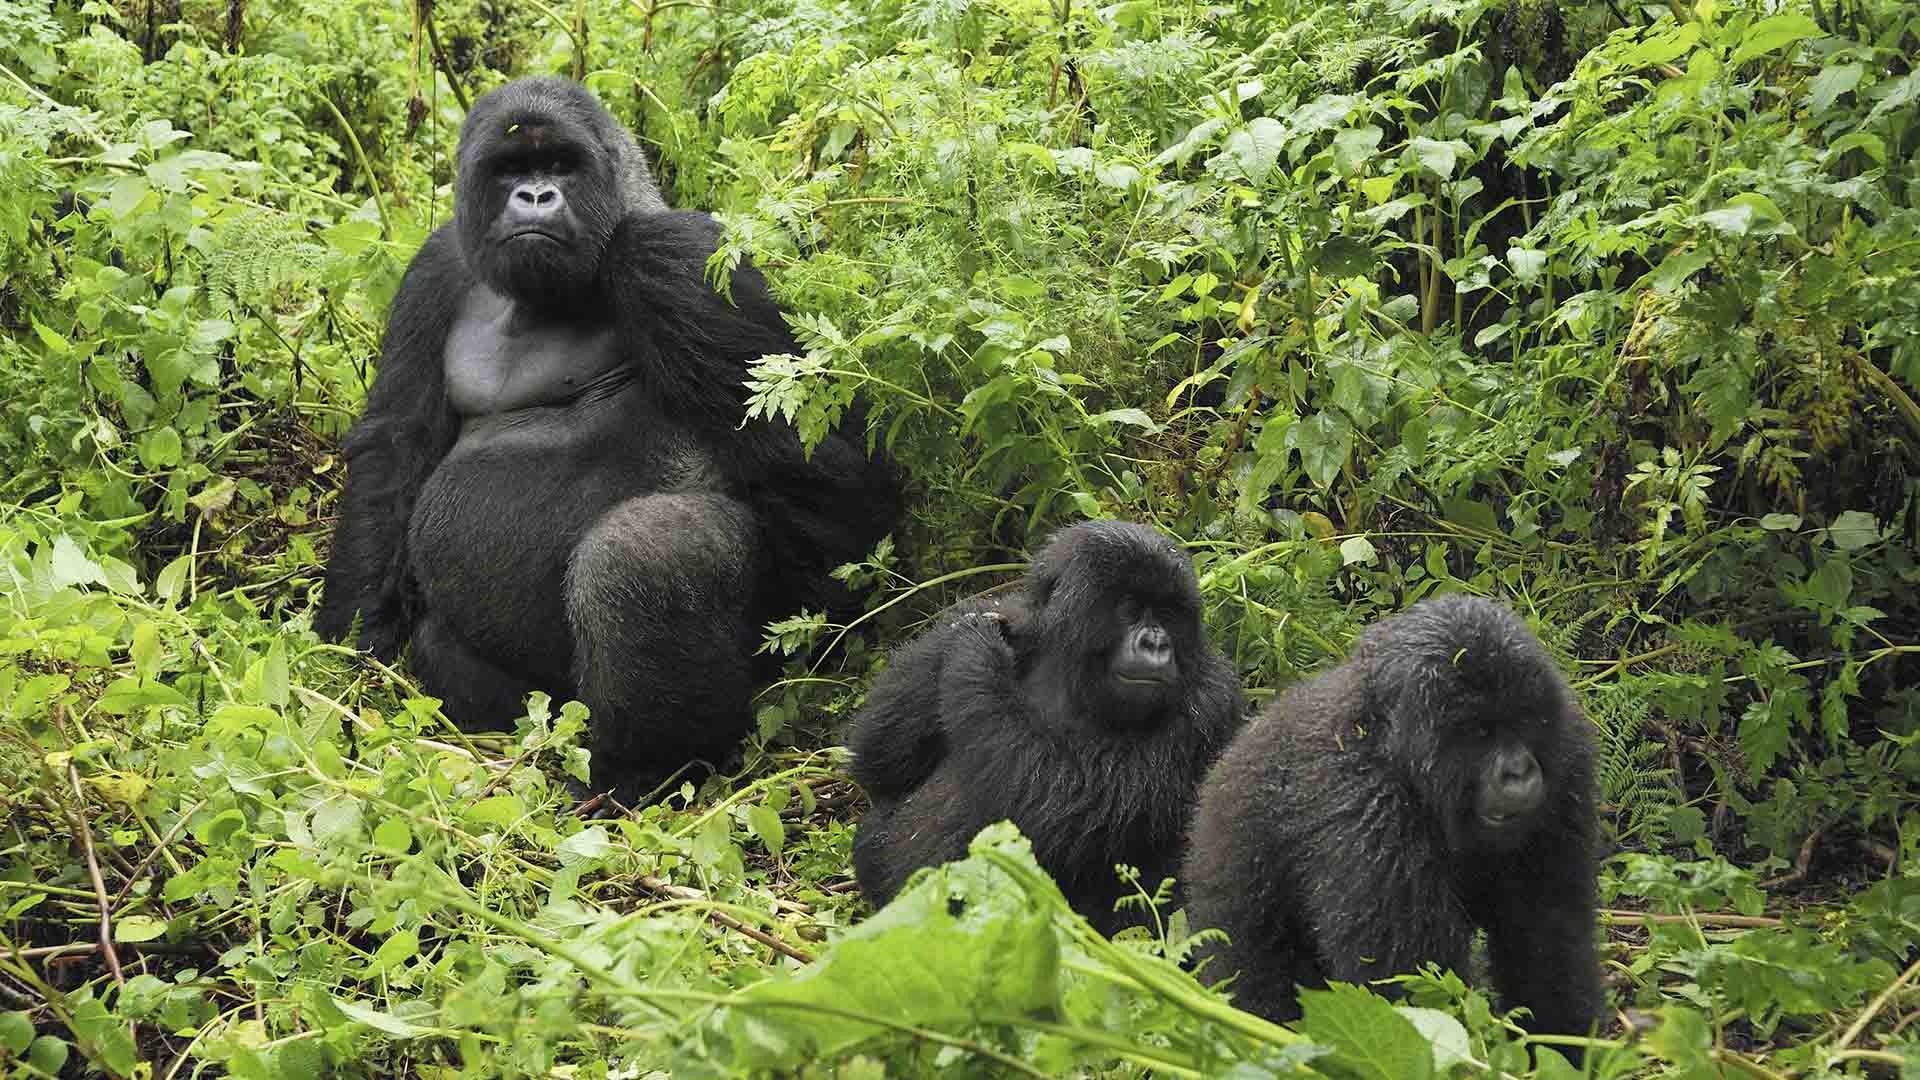 How big are gorillas size, the size of gorillas